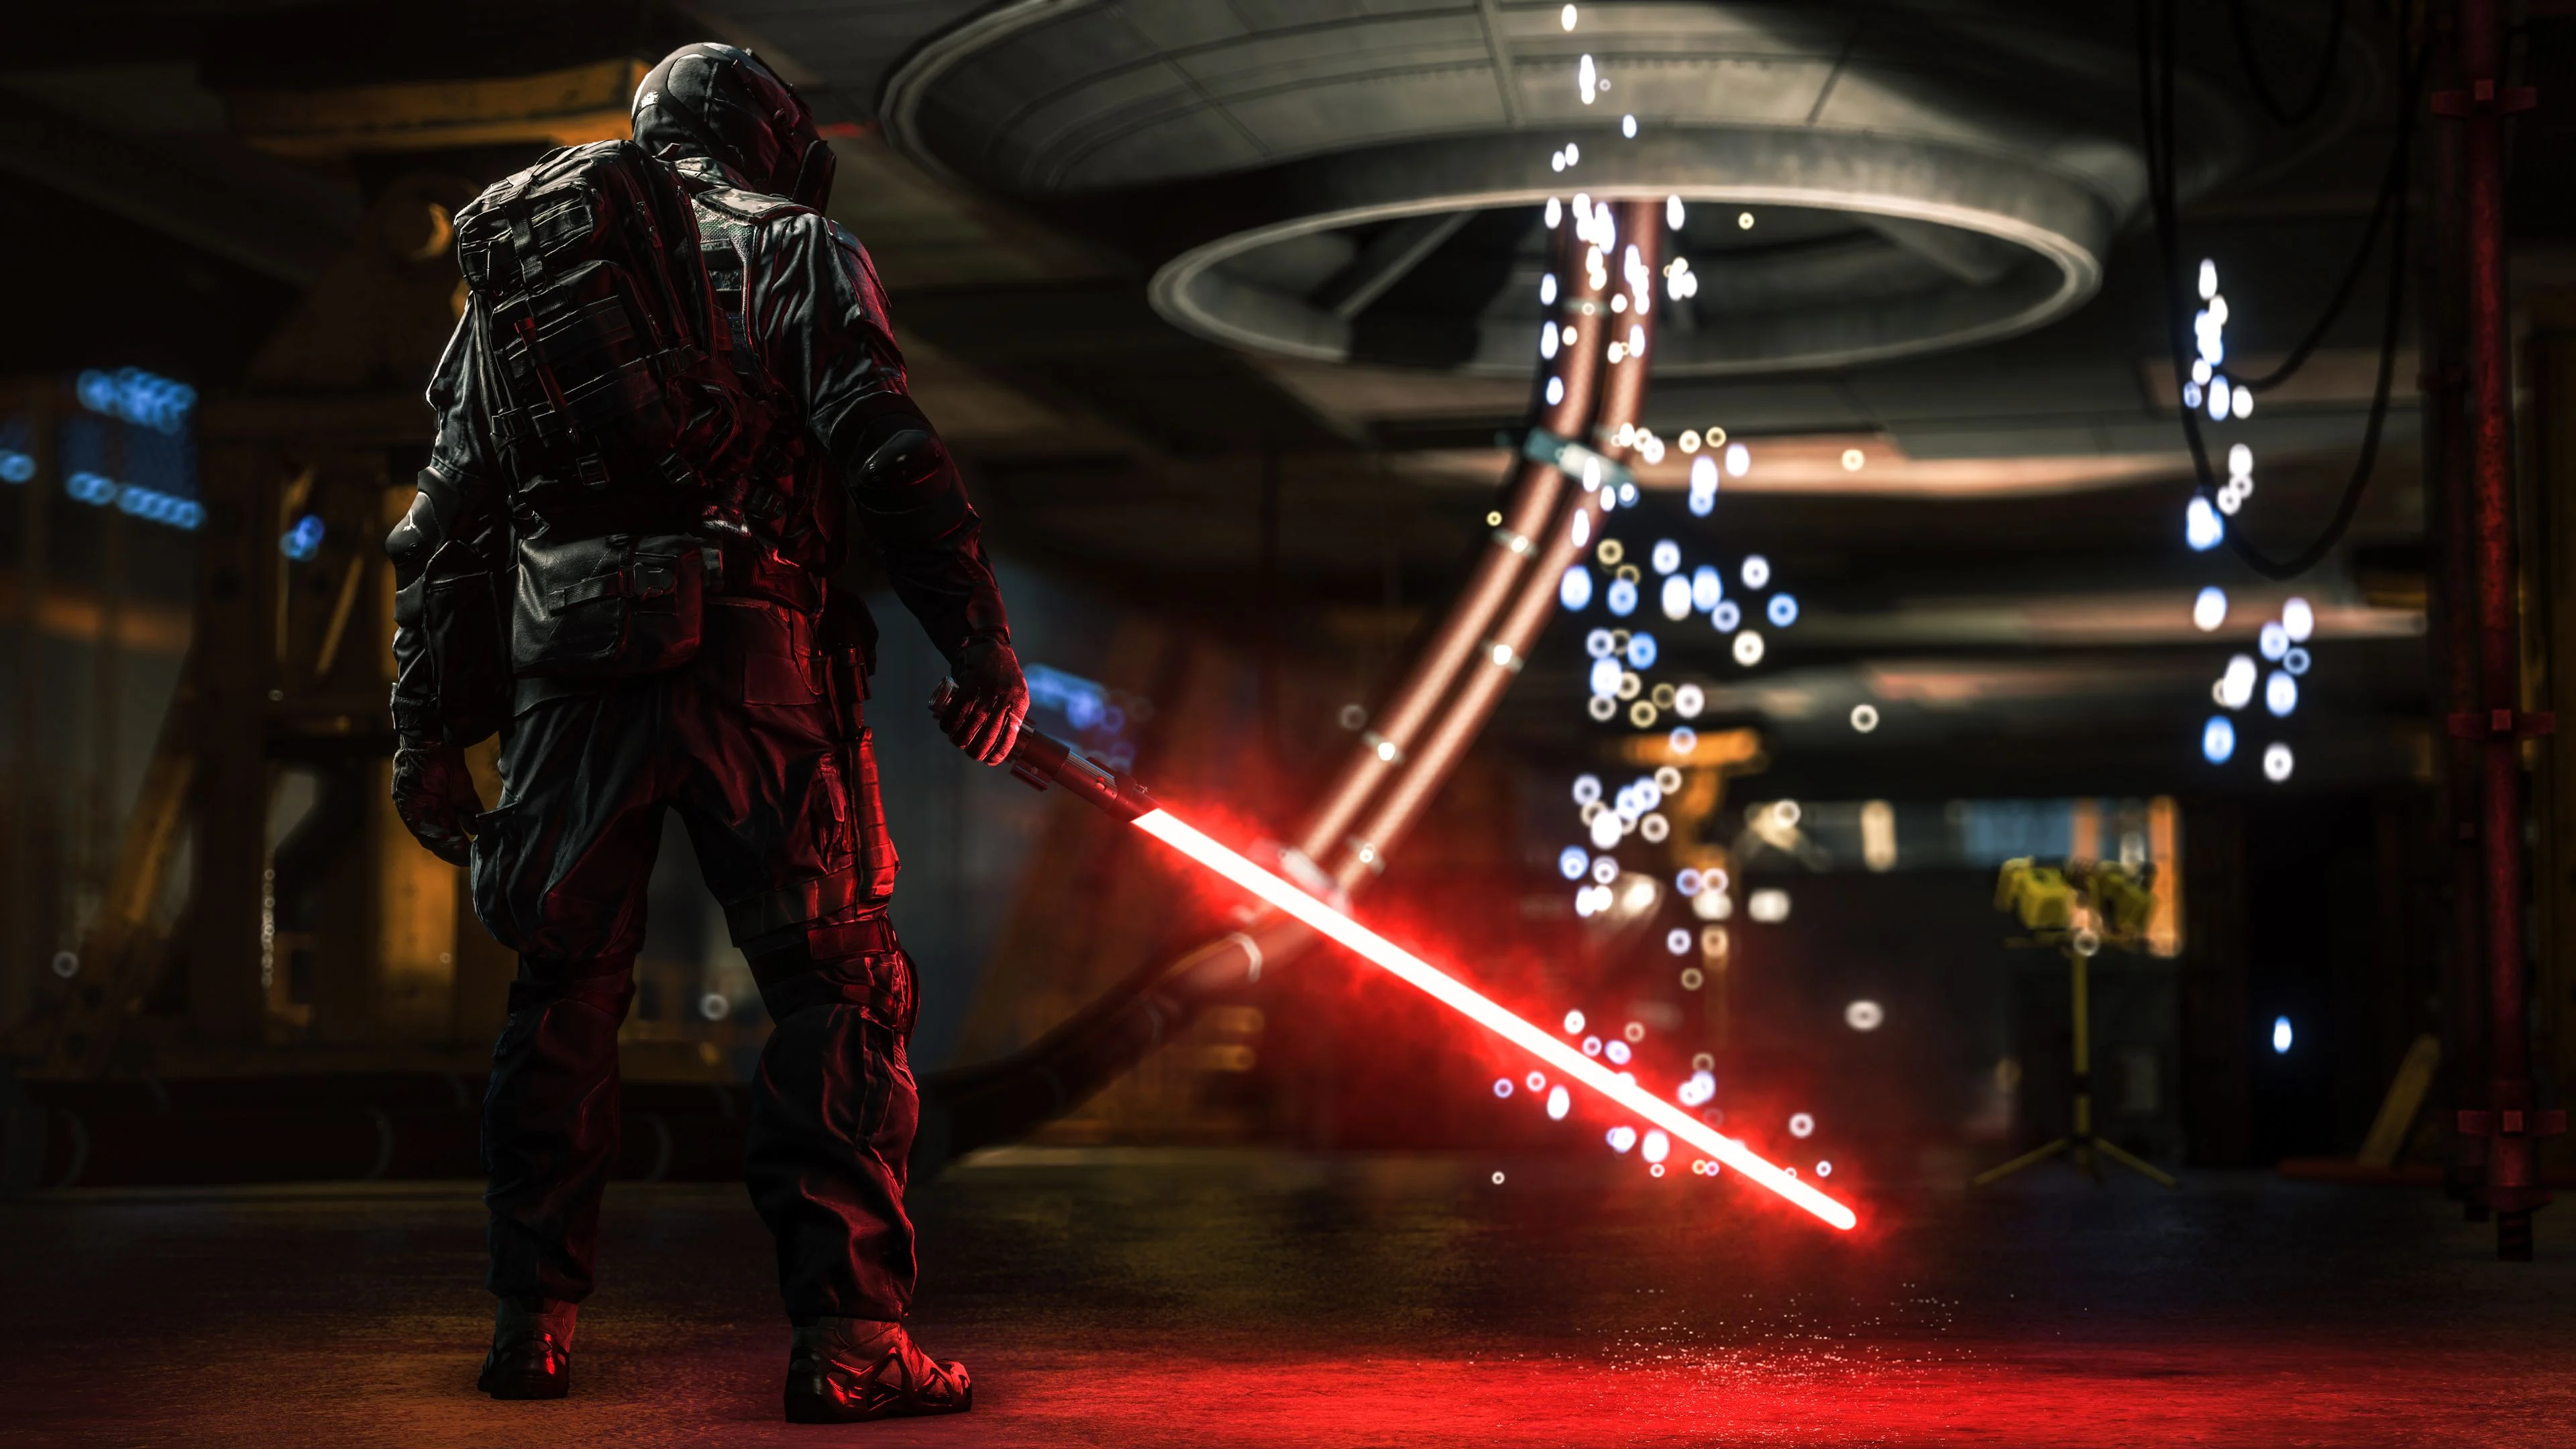 3840x2160 4K Star Wars Sith Wallpapers Top Free 4K Star Wars Sith Backgrounds